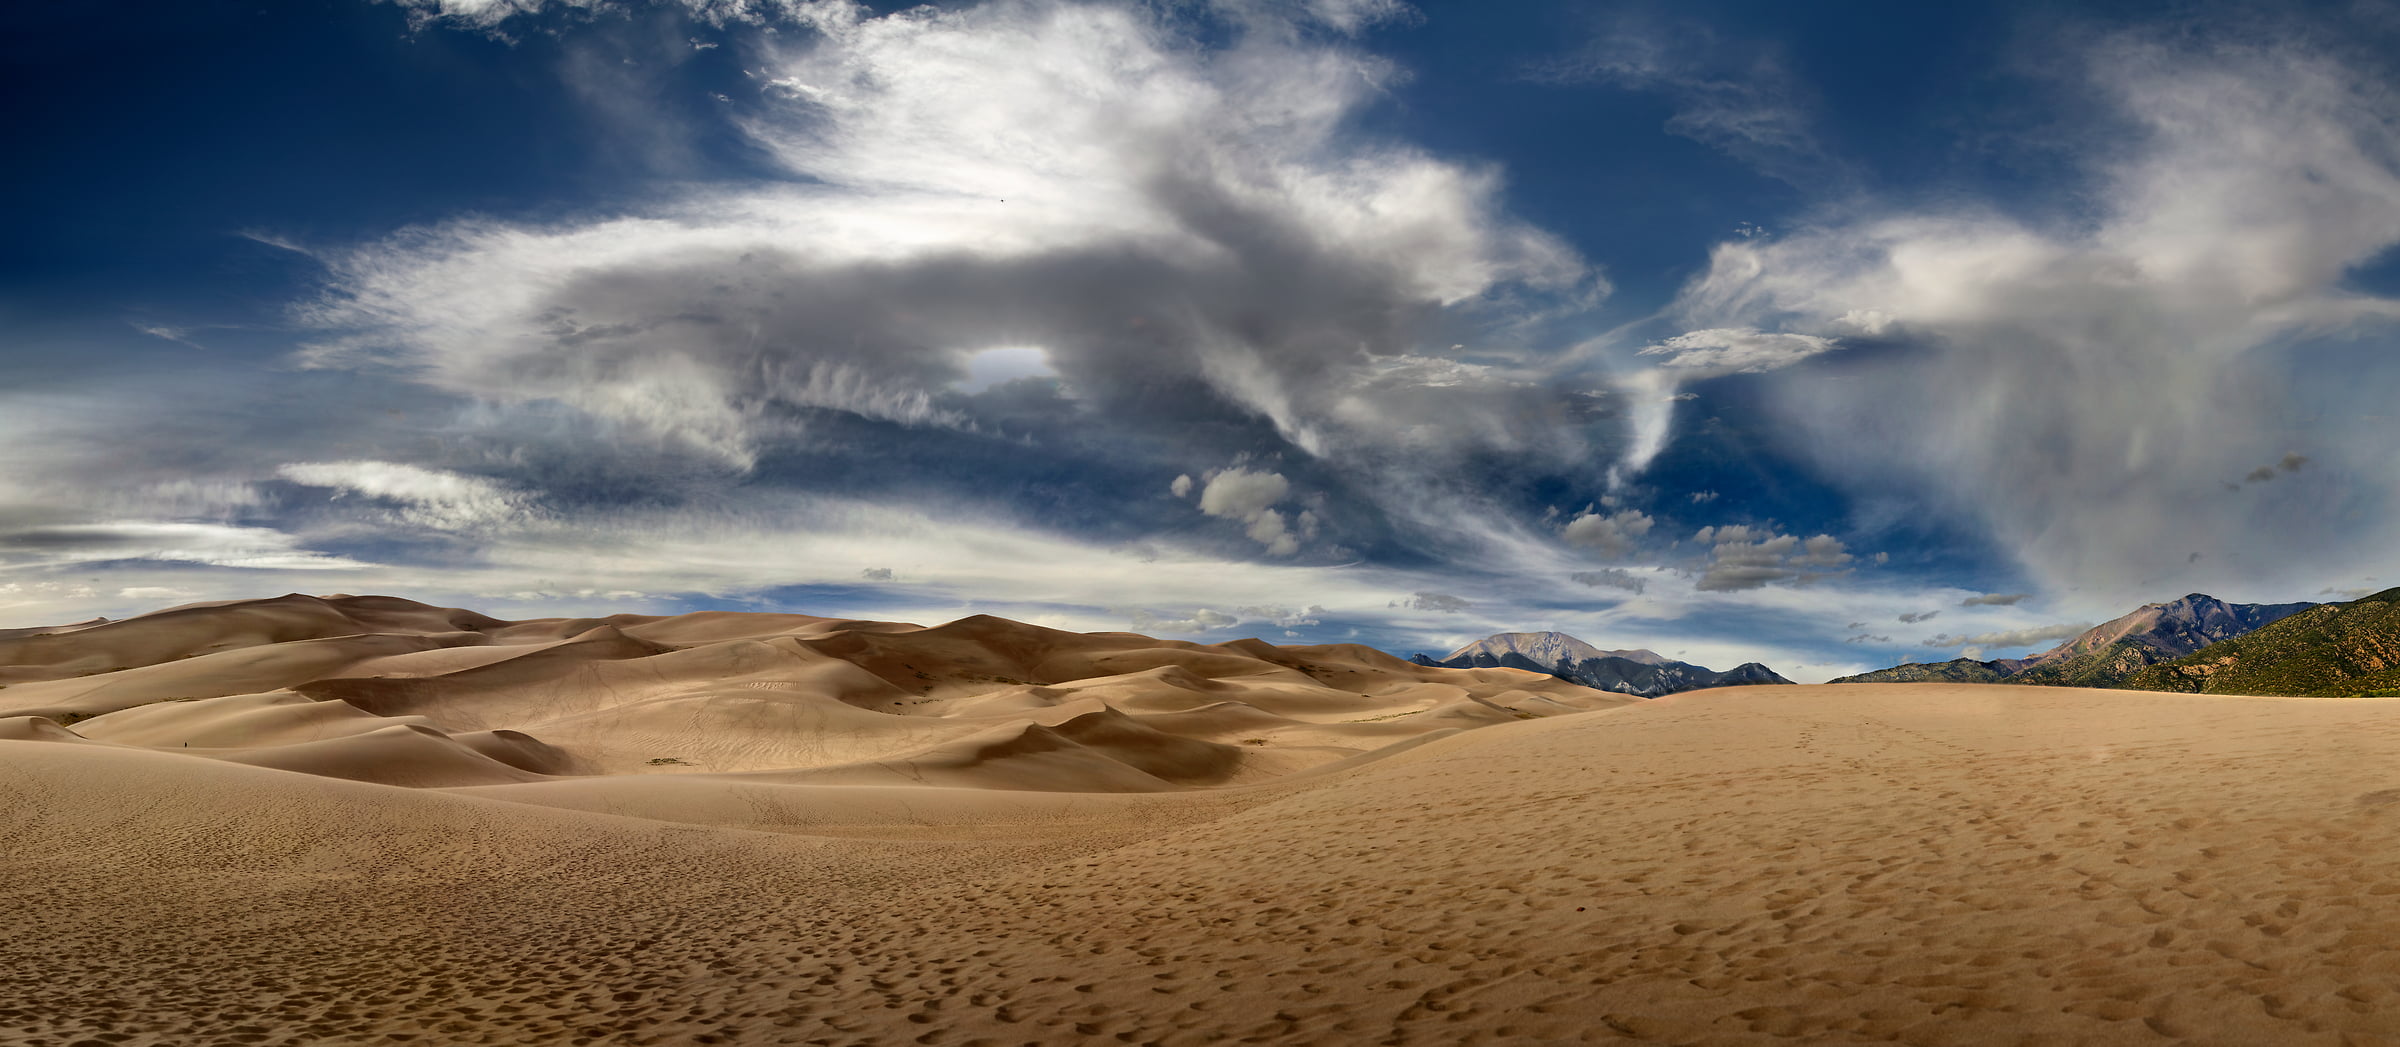 330 megapixels! A very high resolution landscape photo of desert sand dunes; VAST photo created by Phil Crawshay in Great Sand Dunes National Park, Colorado, USA.